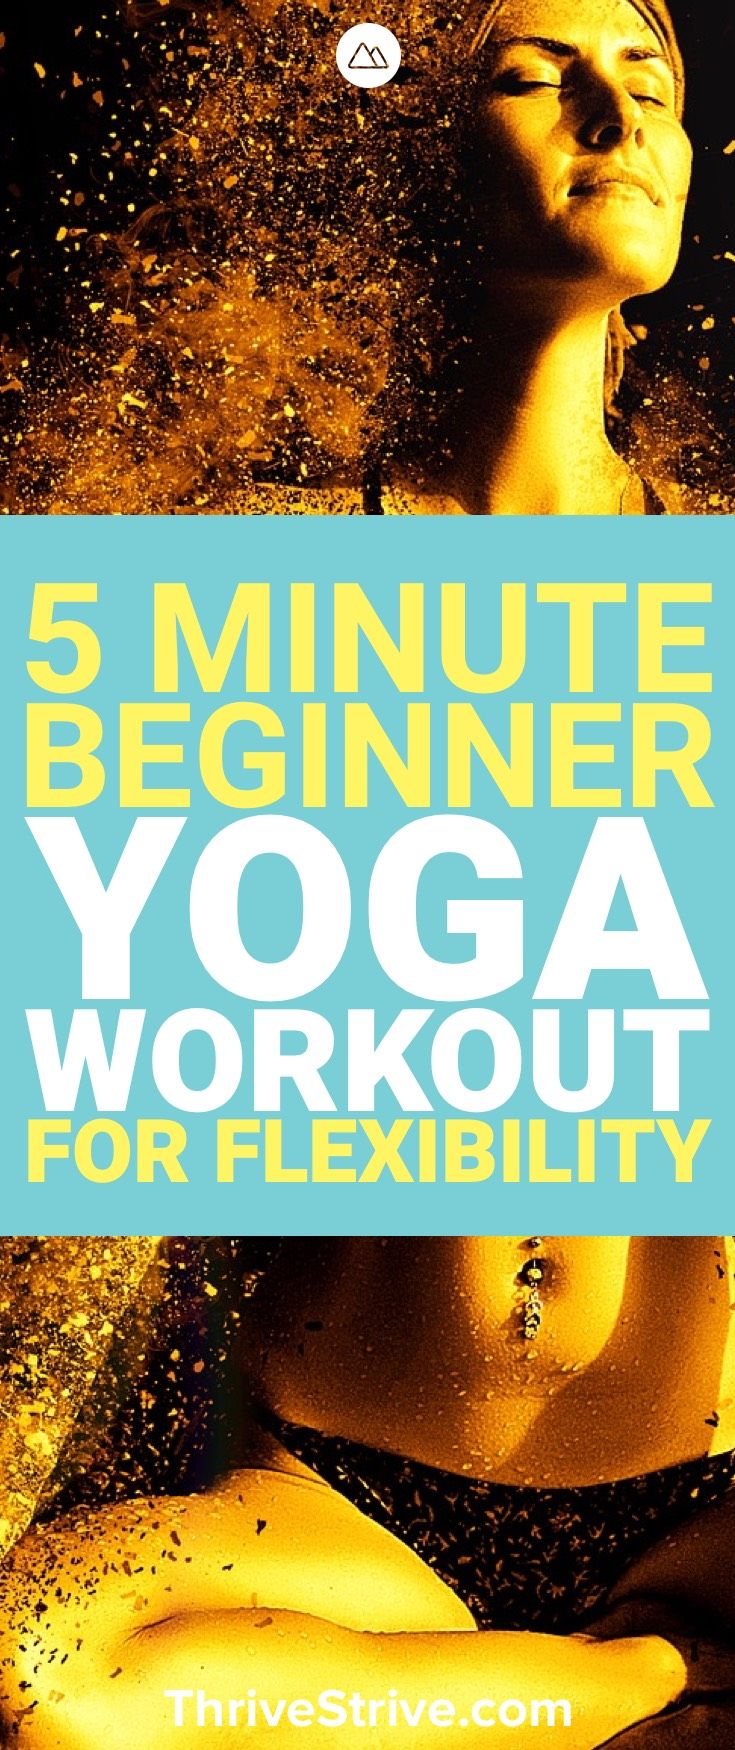 Looking for a yoga workout for flexibility? Here is a yoga workout for beginners...